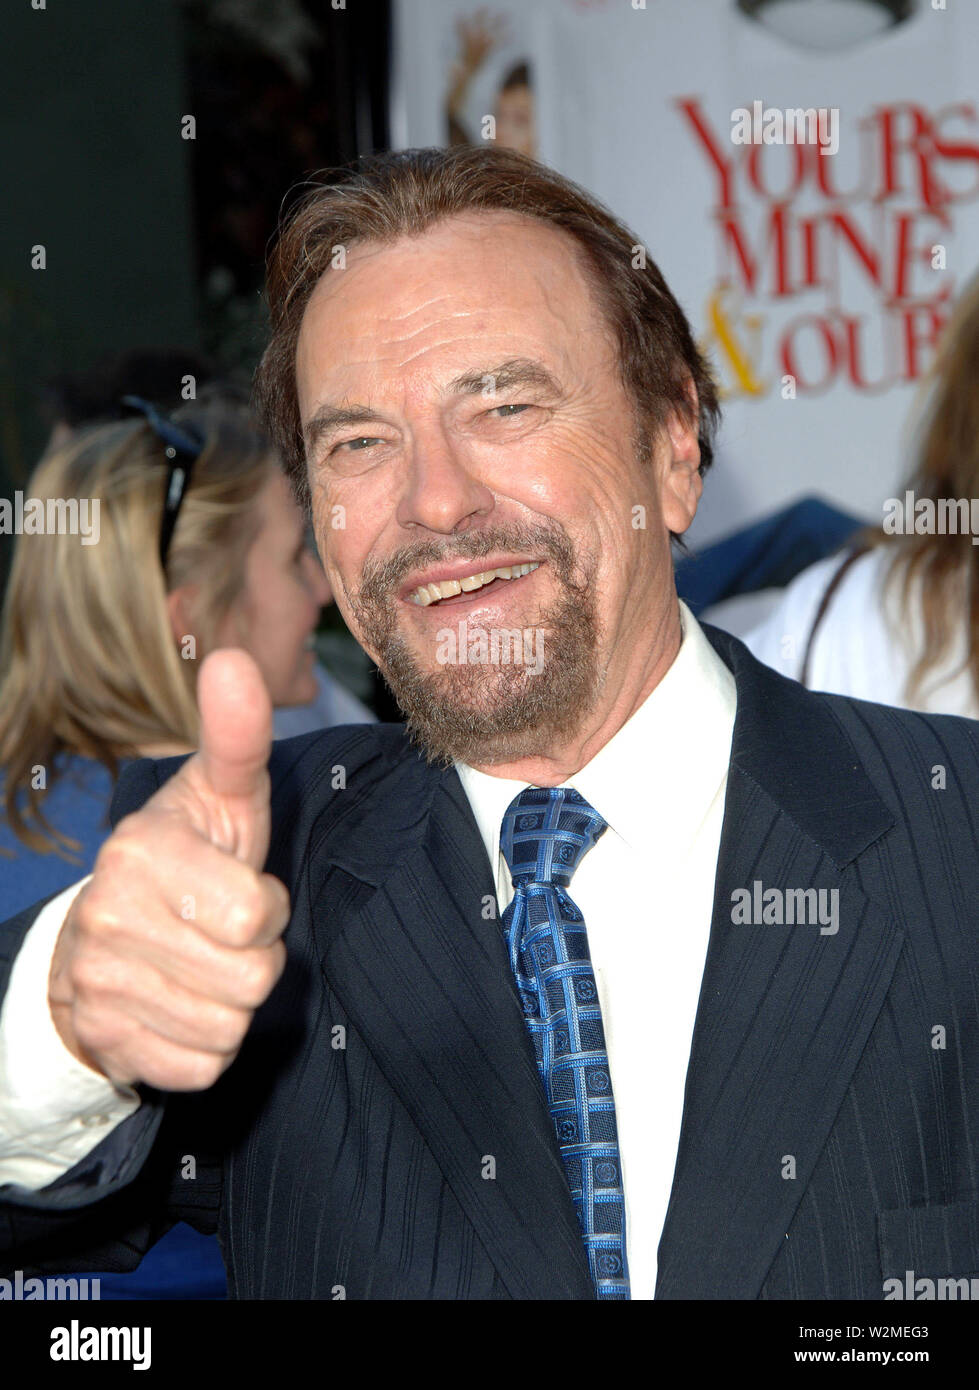 July 09, 2019, FILE: RIP TORN, a prolific actor best known for HBO’s “The Larry Sanders Show” and the “Men in Black” franchise, died Tuesday at his home in Lakeville, Connecticut, his representatives said. He was 88. PICTURED: Nov. 20, 2005 - Hollywood, CALIFORNIA, USA - K45814FB. YOURS, MINE AND OURS PREMIERE AT THE CINERAMADOME HOLLYWOOD, CA. 11/20/2005. FITZROY BARRETT /    2005. RIP TORN(Credit Image: © Fitzroy Barrett/Globe Photos/ZUMAPRESS.com) Stock Photo